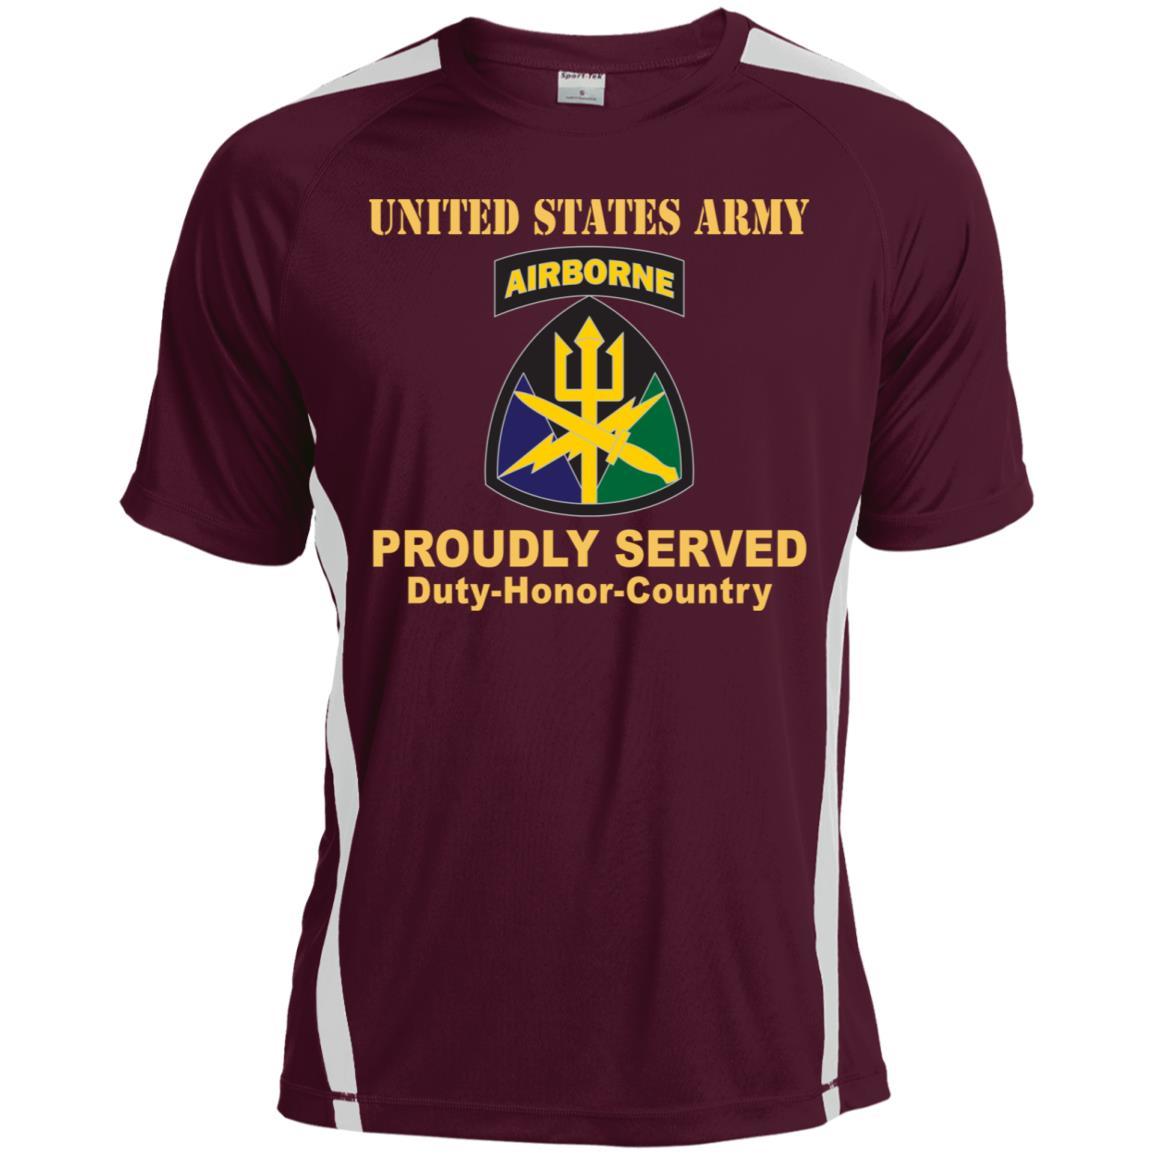 US ARMY SPECIAL OPERATIONS COMMAND JOINT FORCES- Proudly Served T-Shirt On Front For Men-TShirt-Army-Veterans Nation